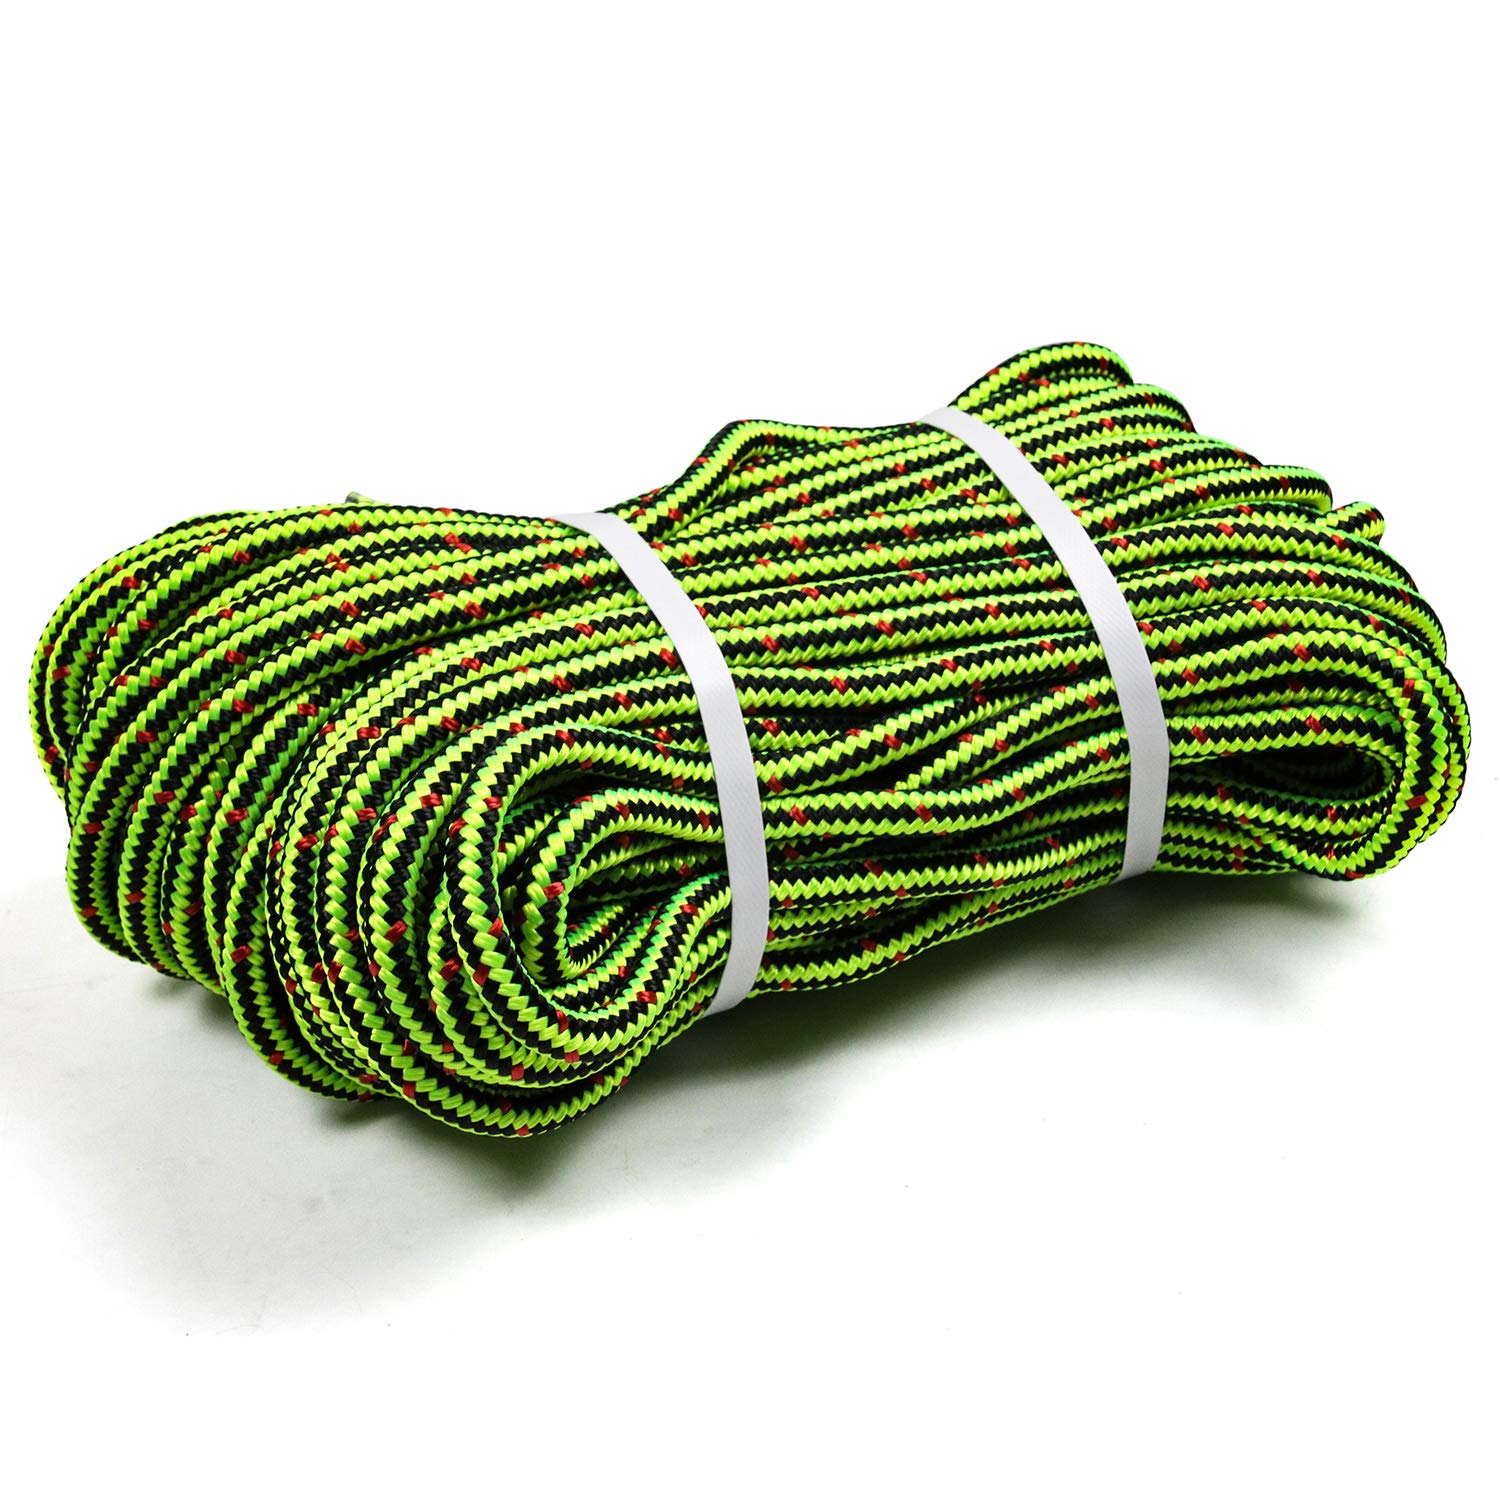 Perantlb 16 Strand Arborist Climbing Rope, UV Resistant and Weather  Resistant Double Braided Boat rope1 / 2by 150 'Black with Green